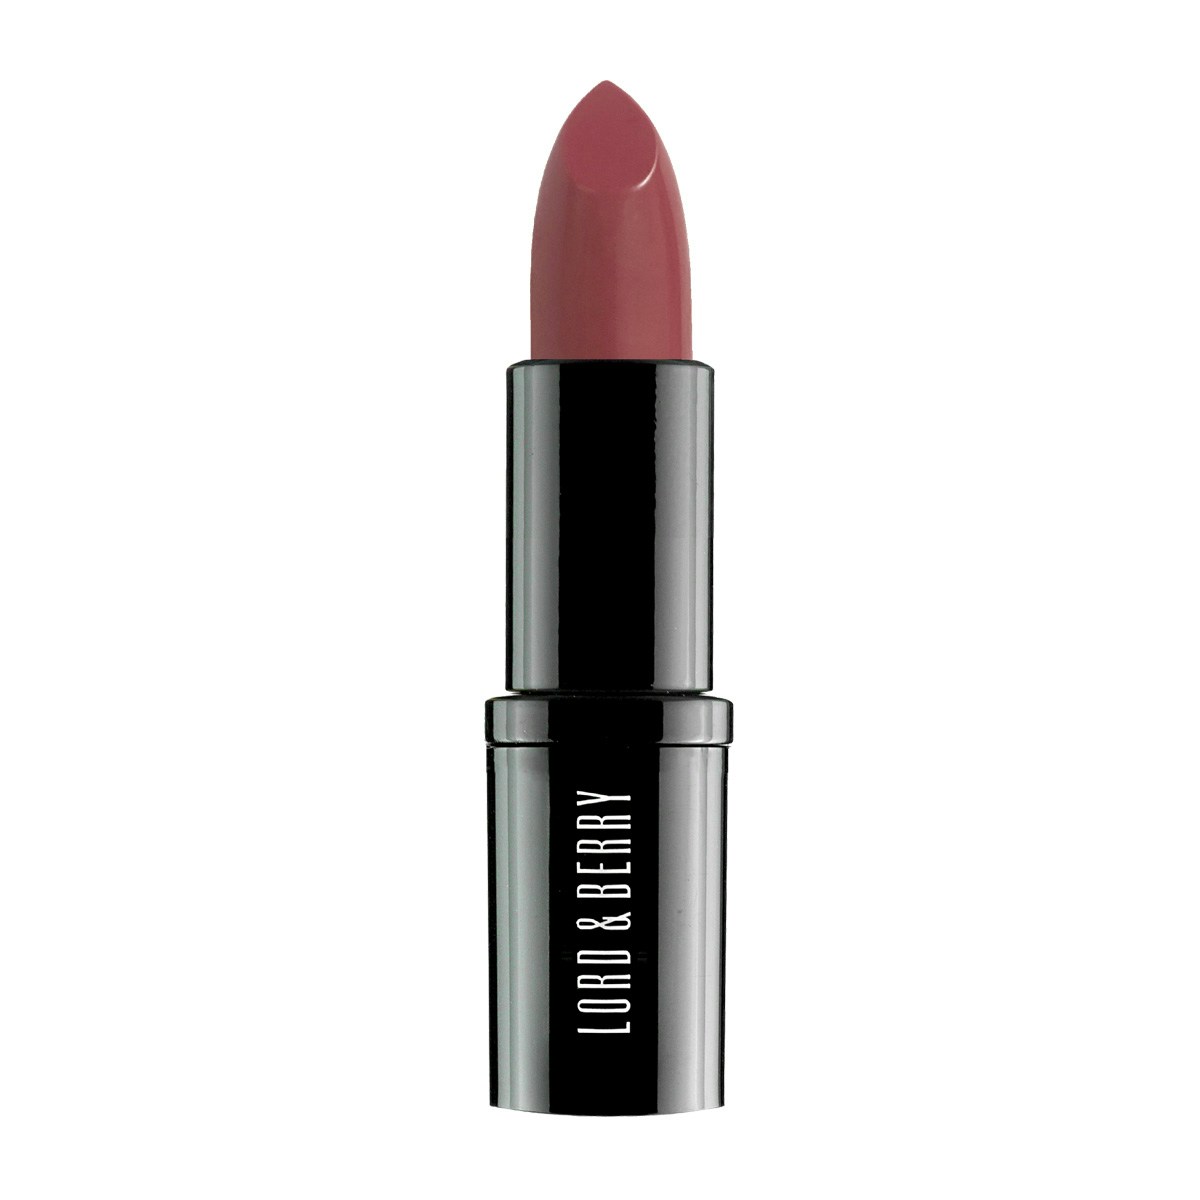 Lord & Berry Lord & Berry Absolute Bright Satin Lipstick - Exotic Bloom - 23g